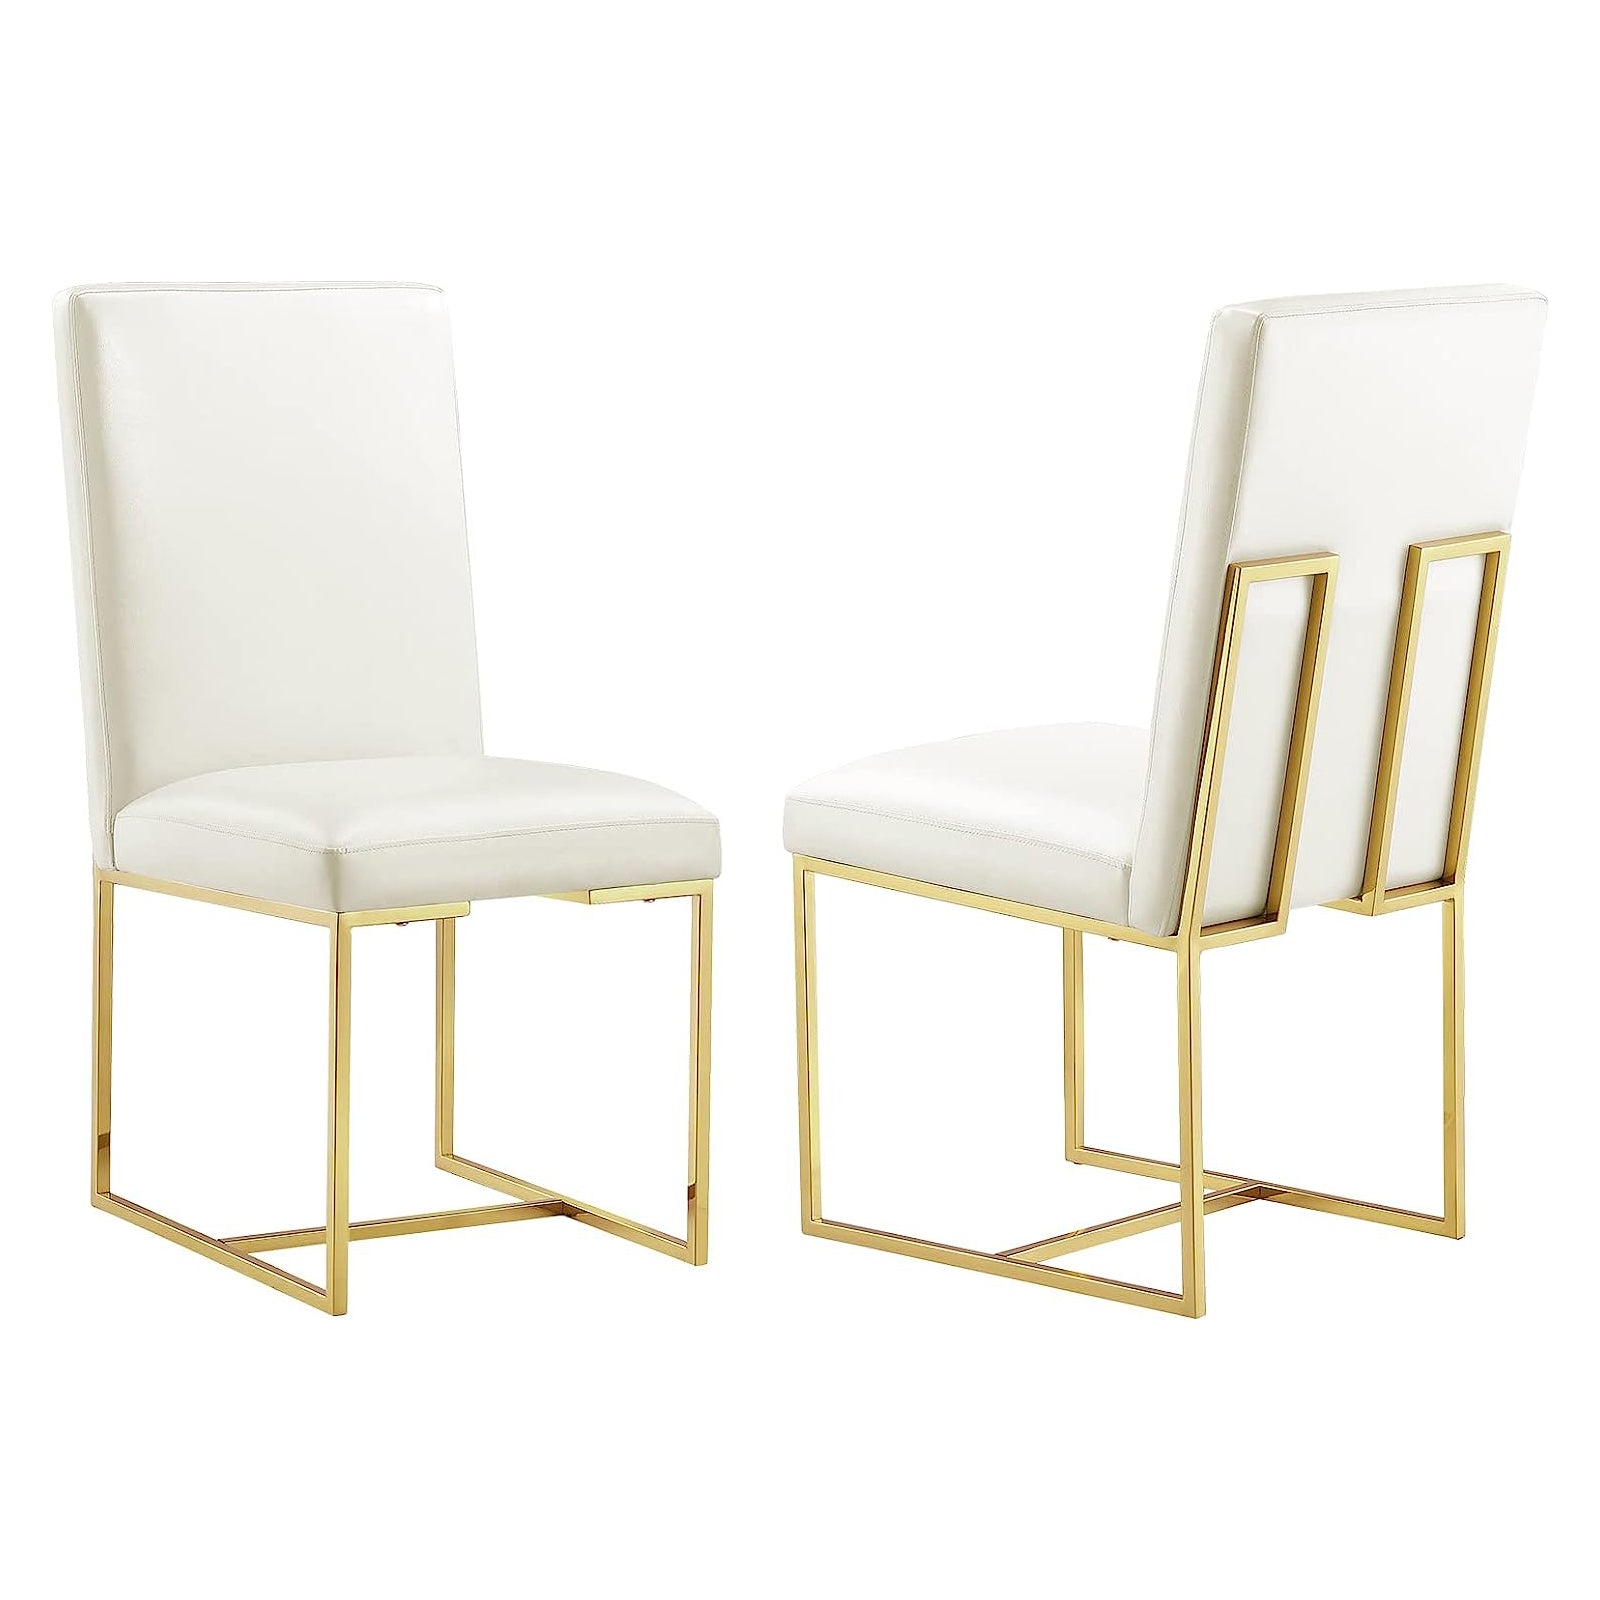 White leather Dining Chairs |Square backrest| Metal sled base | C146